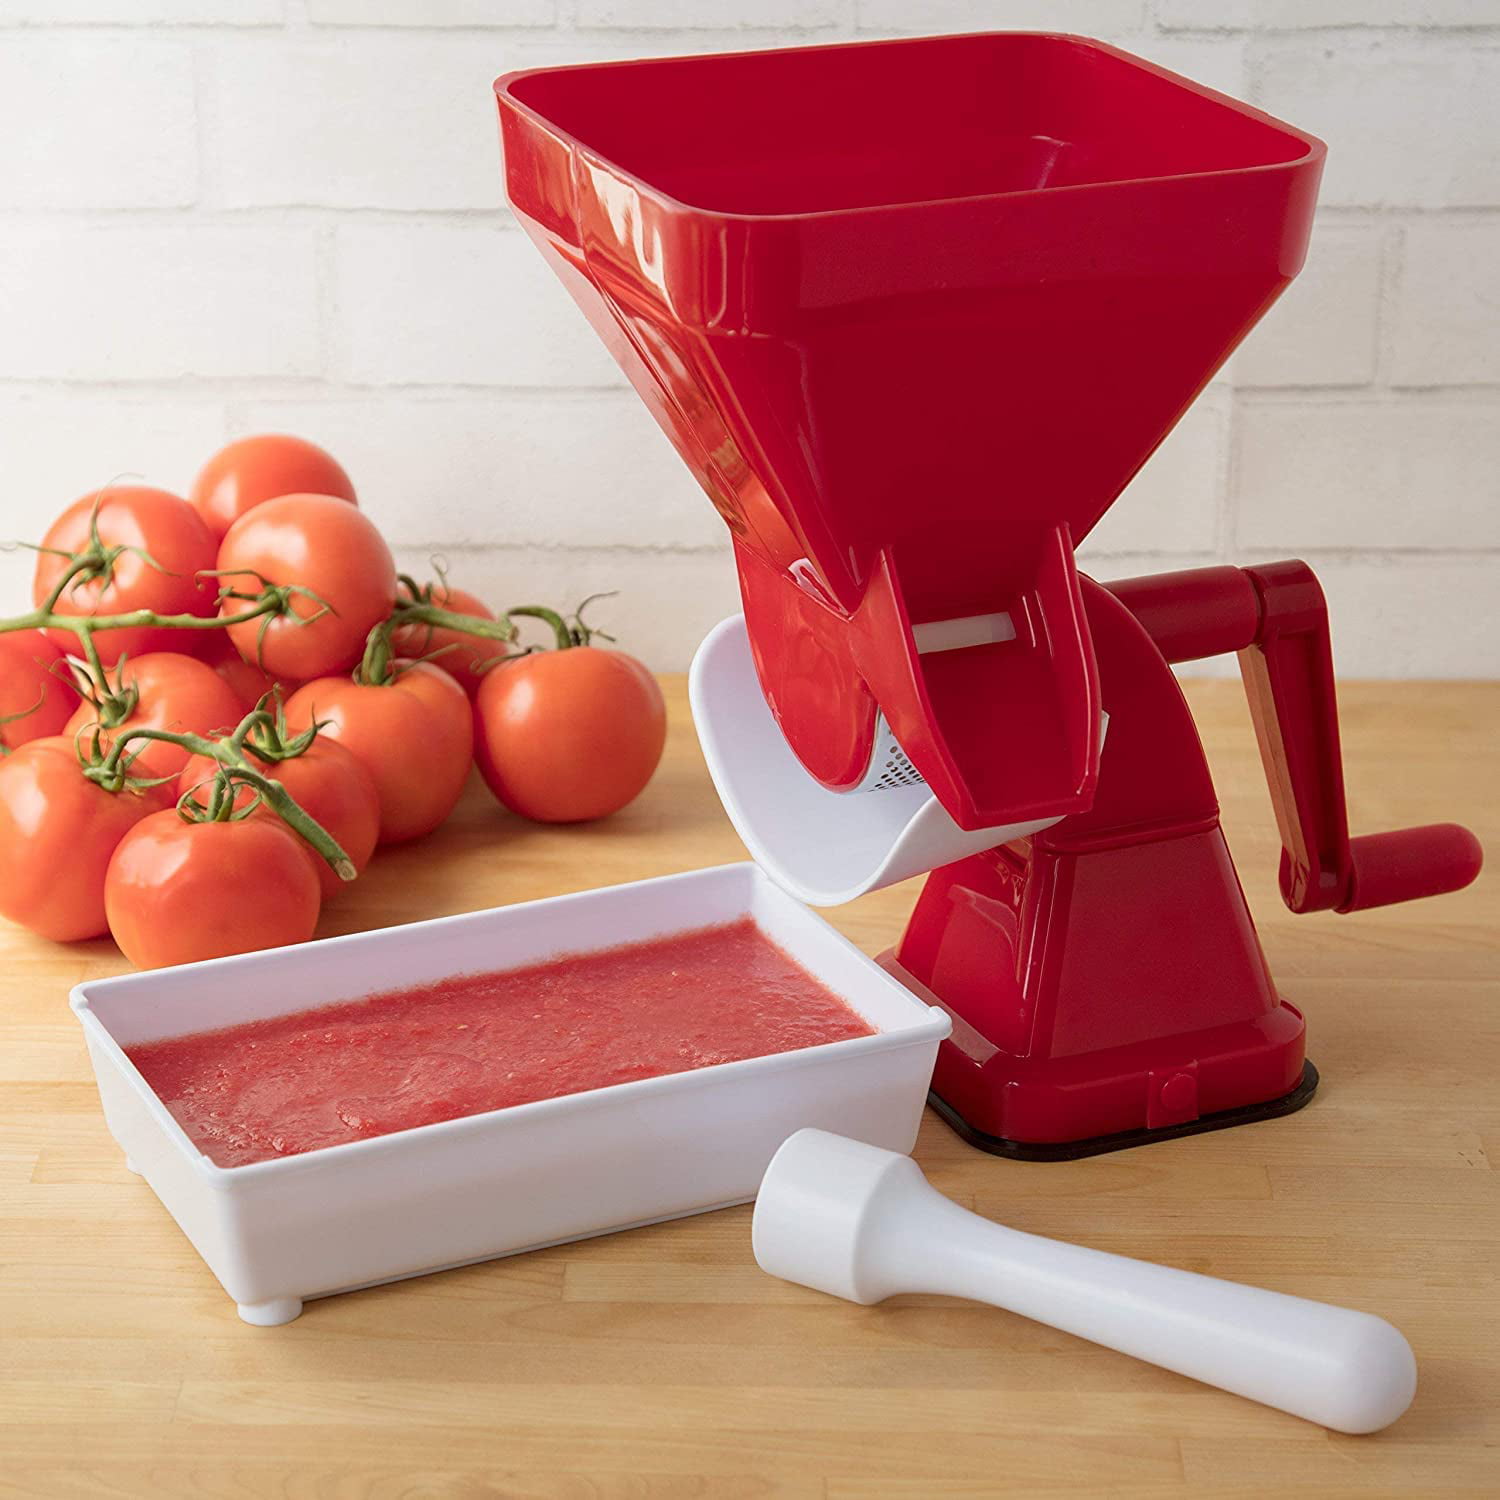 Best Deal for Electric Tomato Strainer 450W Tomato Milling Machine